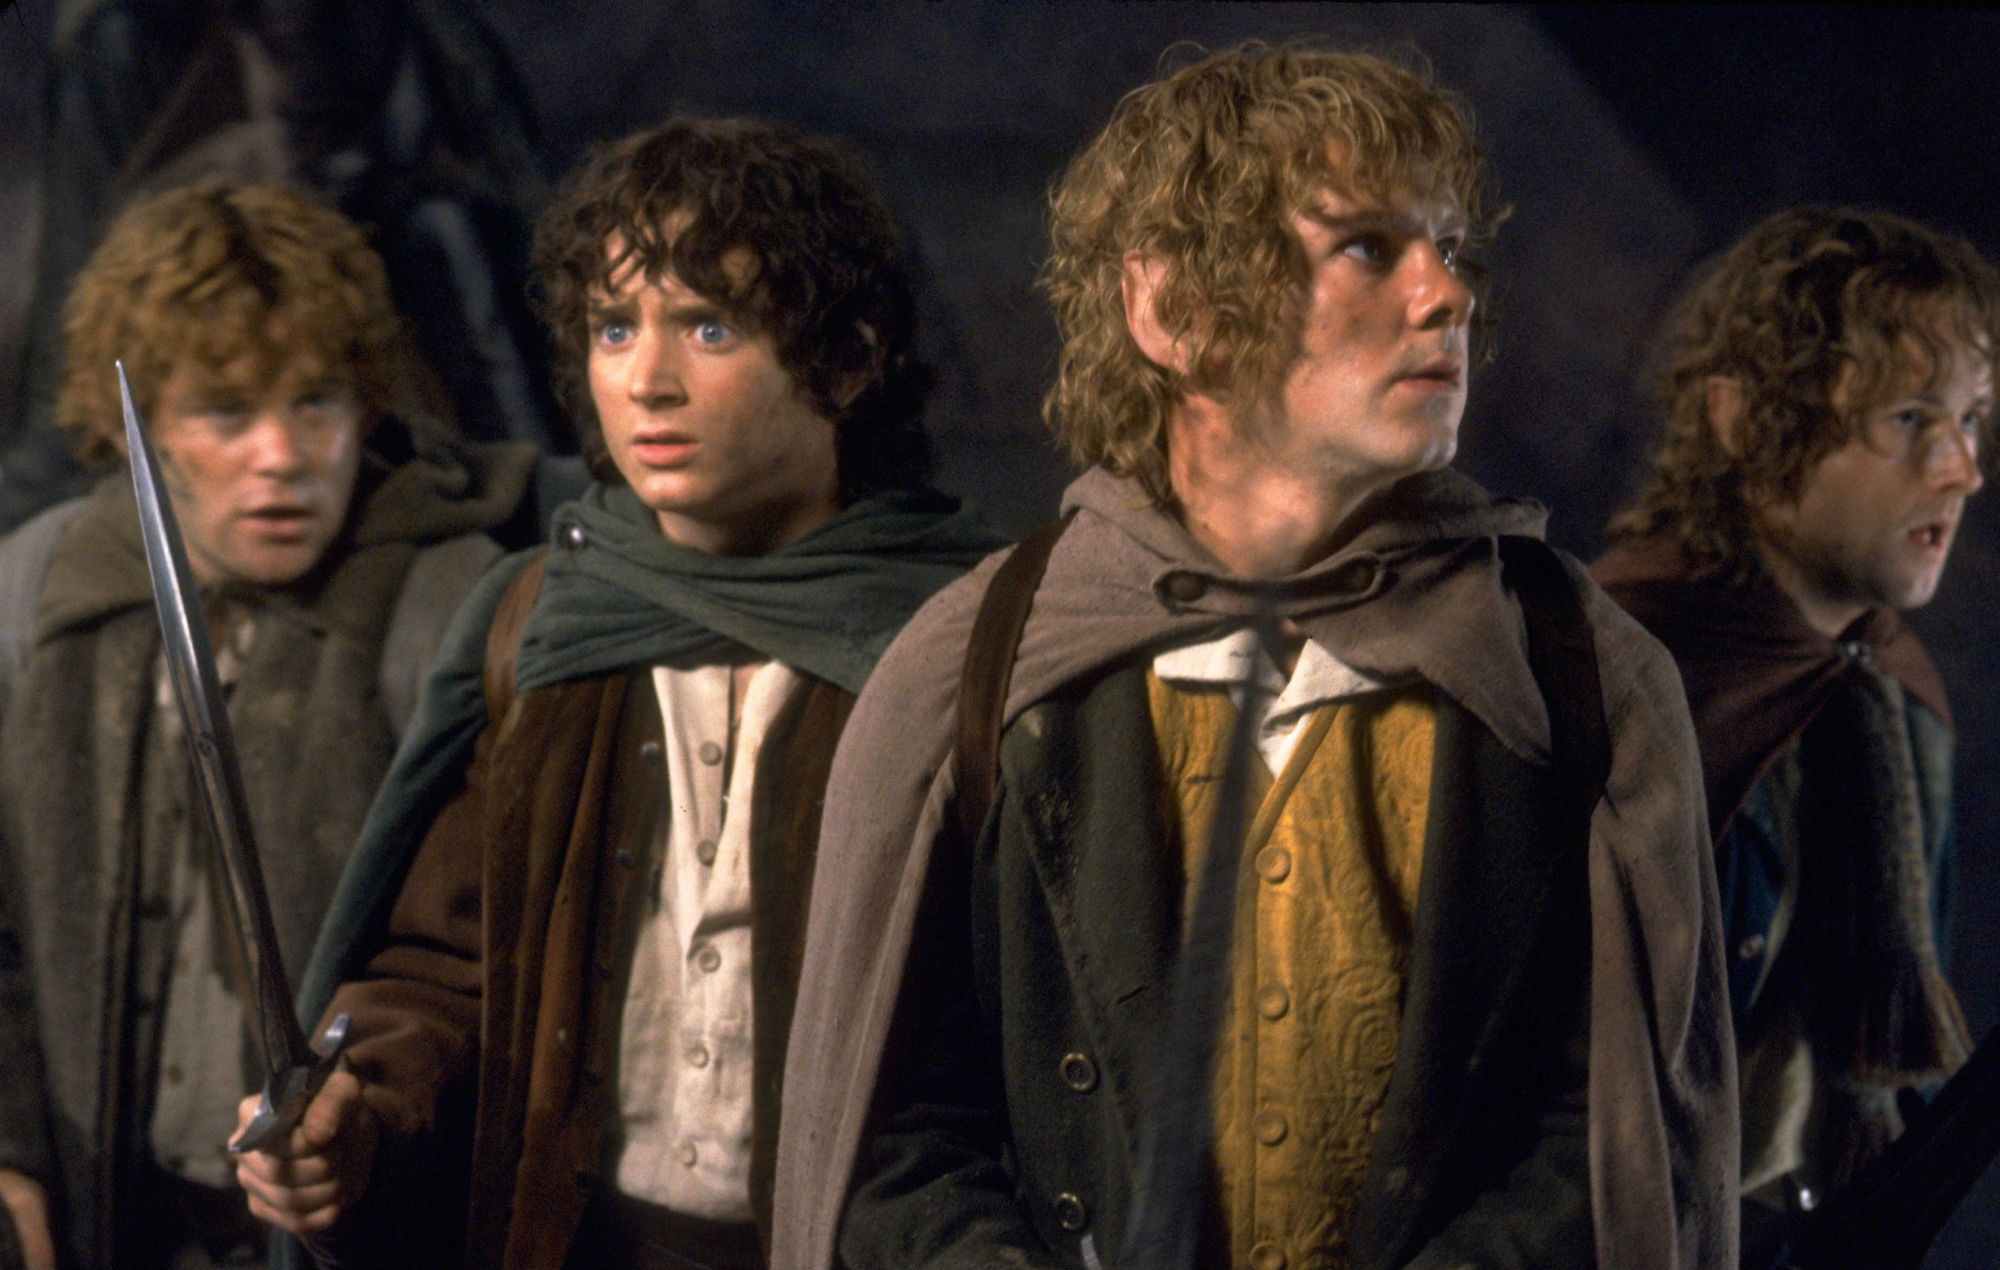 Movie The Lord of the Rings: The Return of the King HD Wallpaper | Background Image